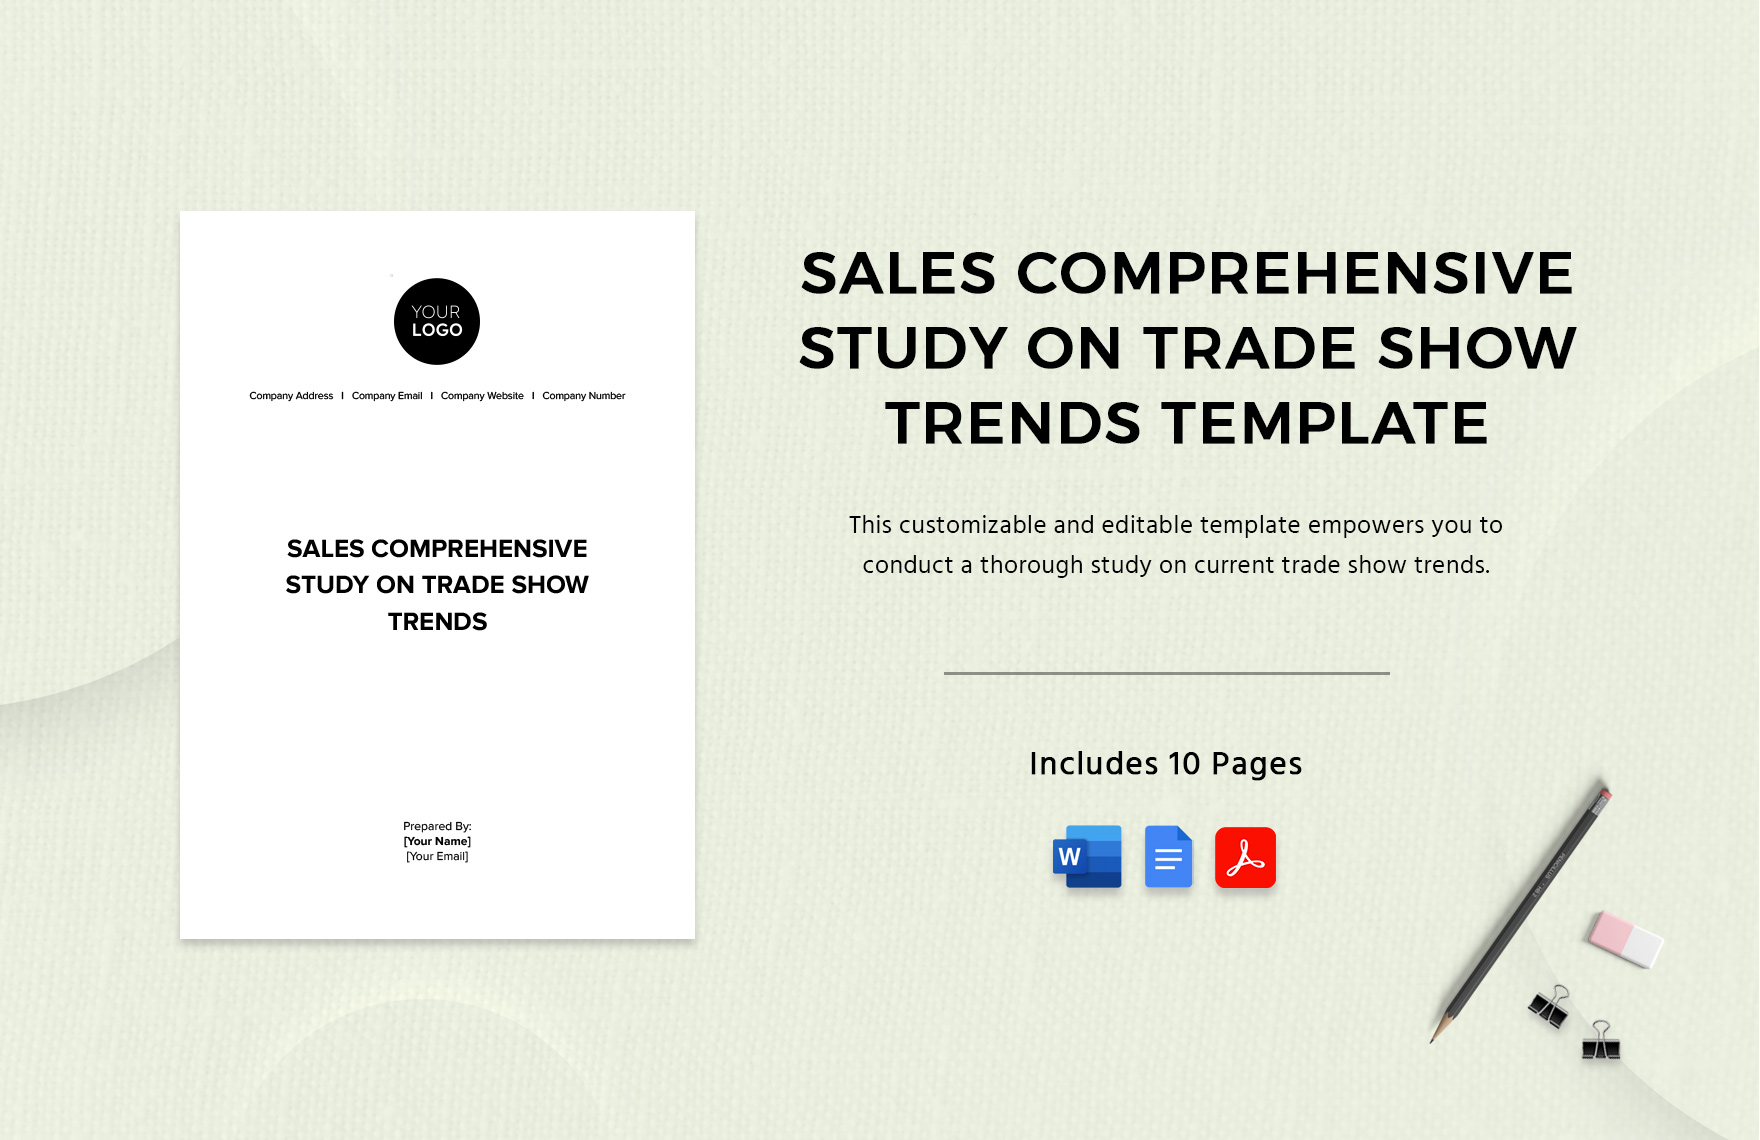 Sales Comprehensive Study on Trade Show Trends Template